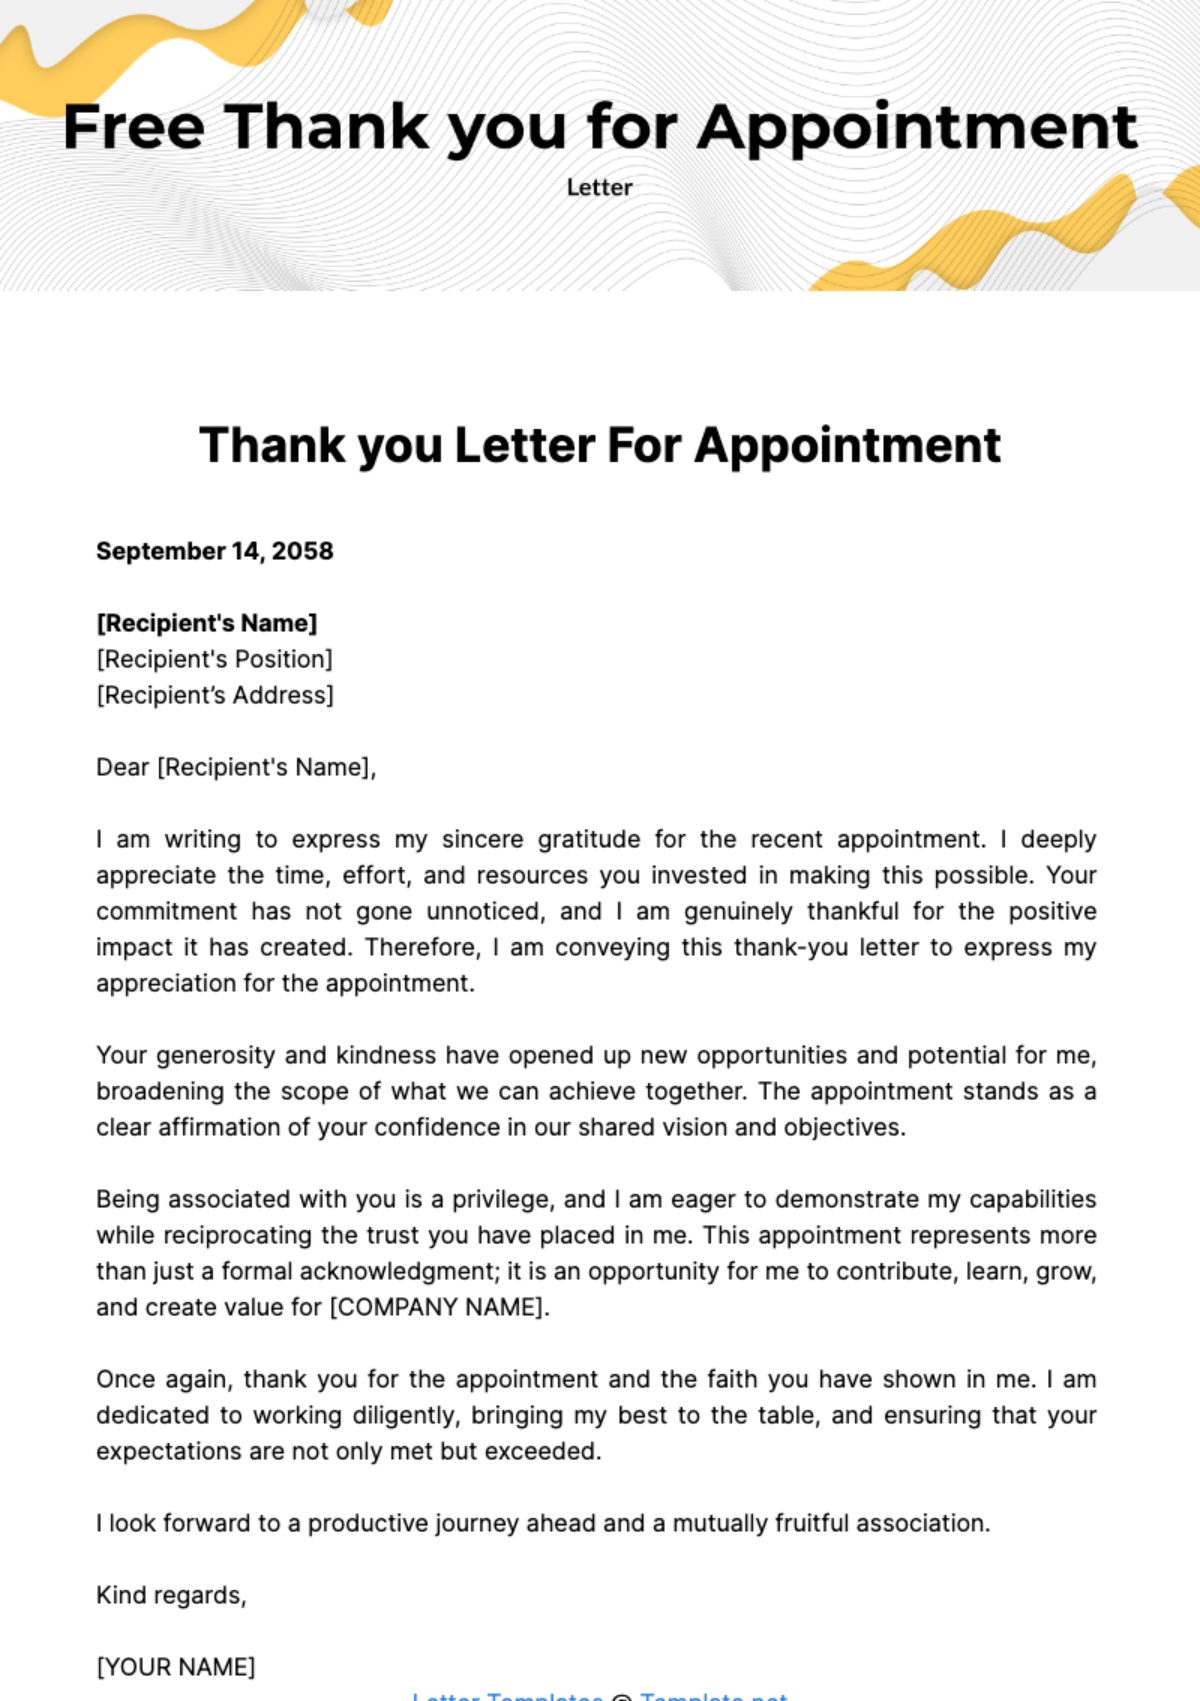 Thank you Letter for Appointment Template